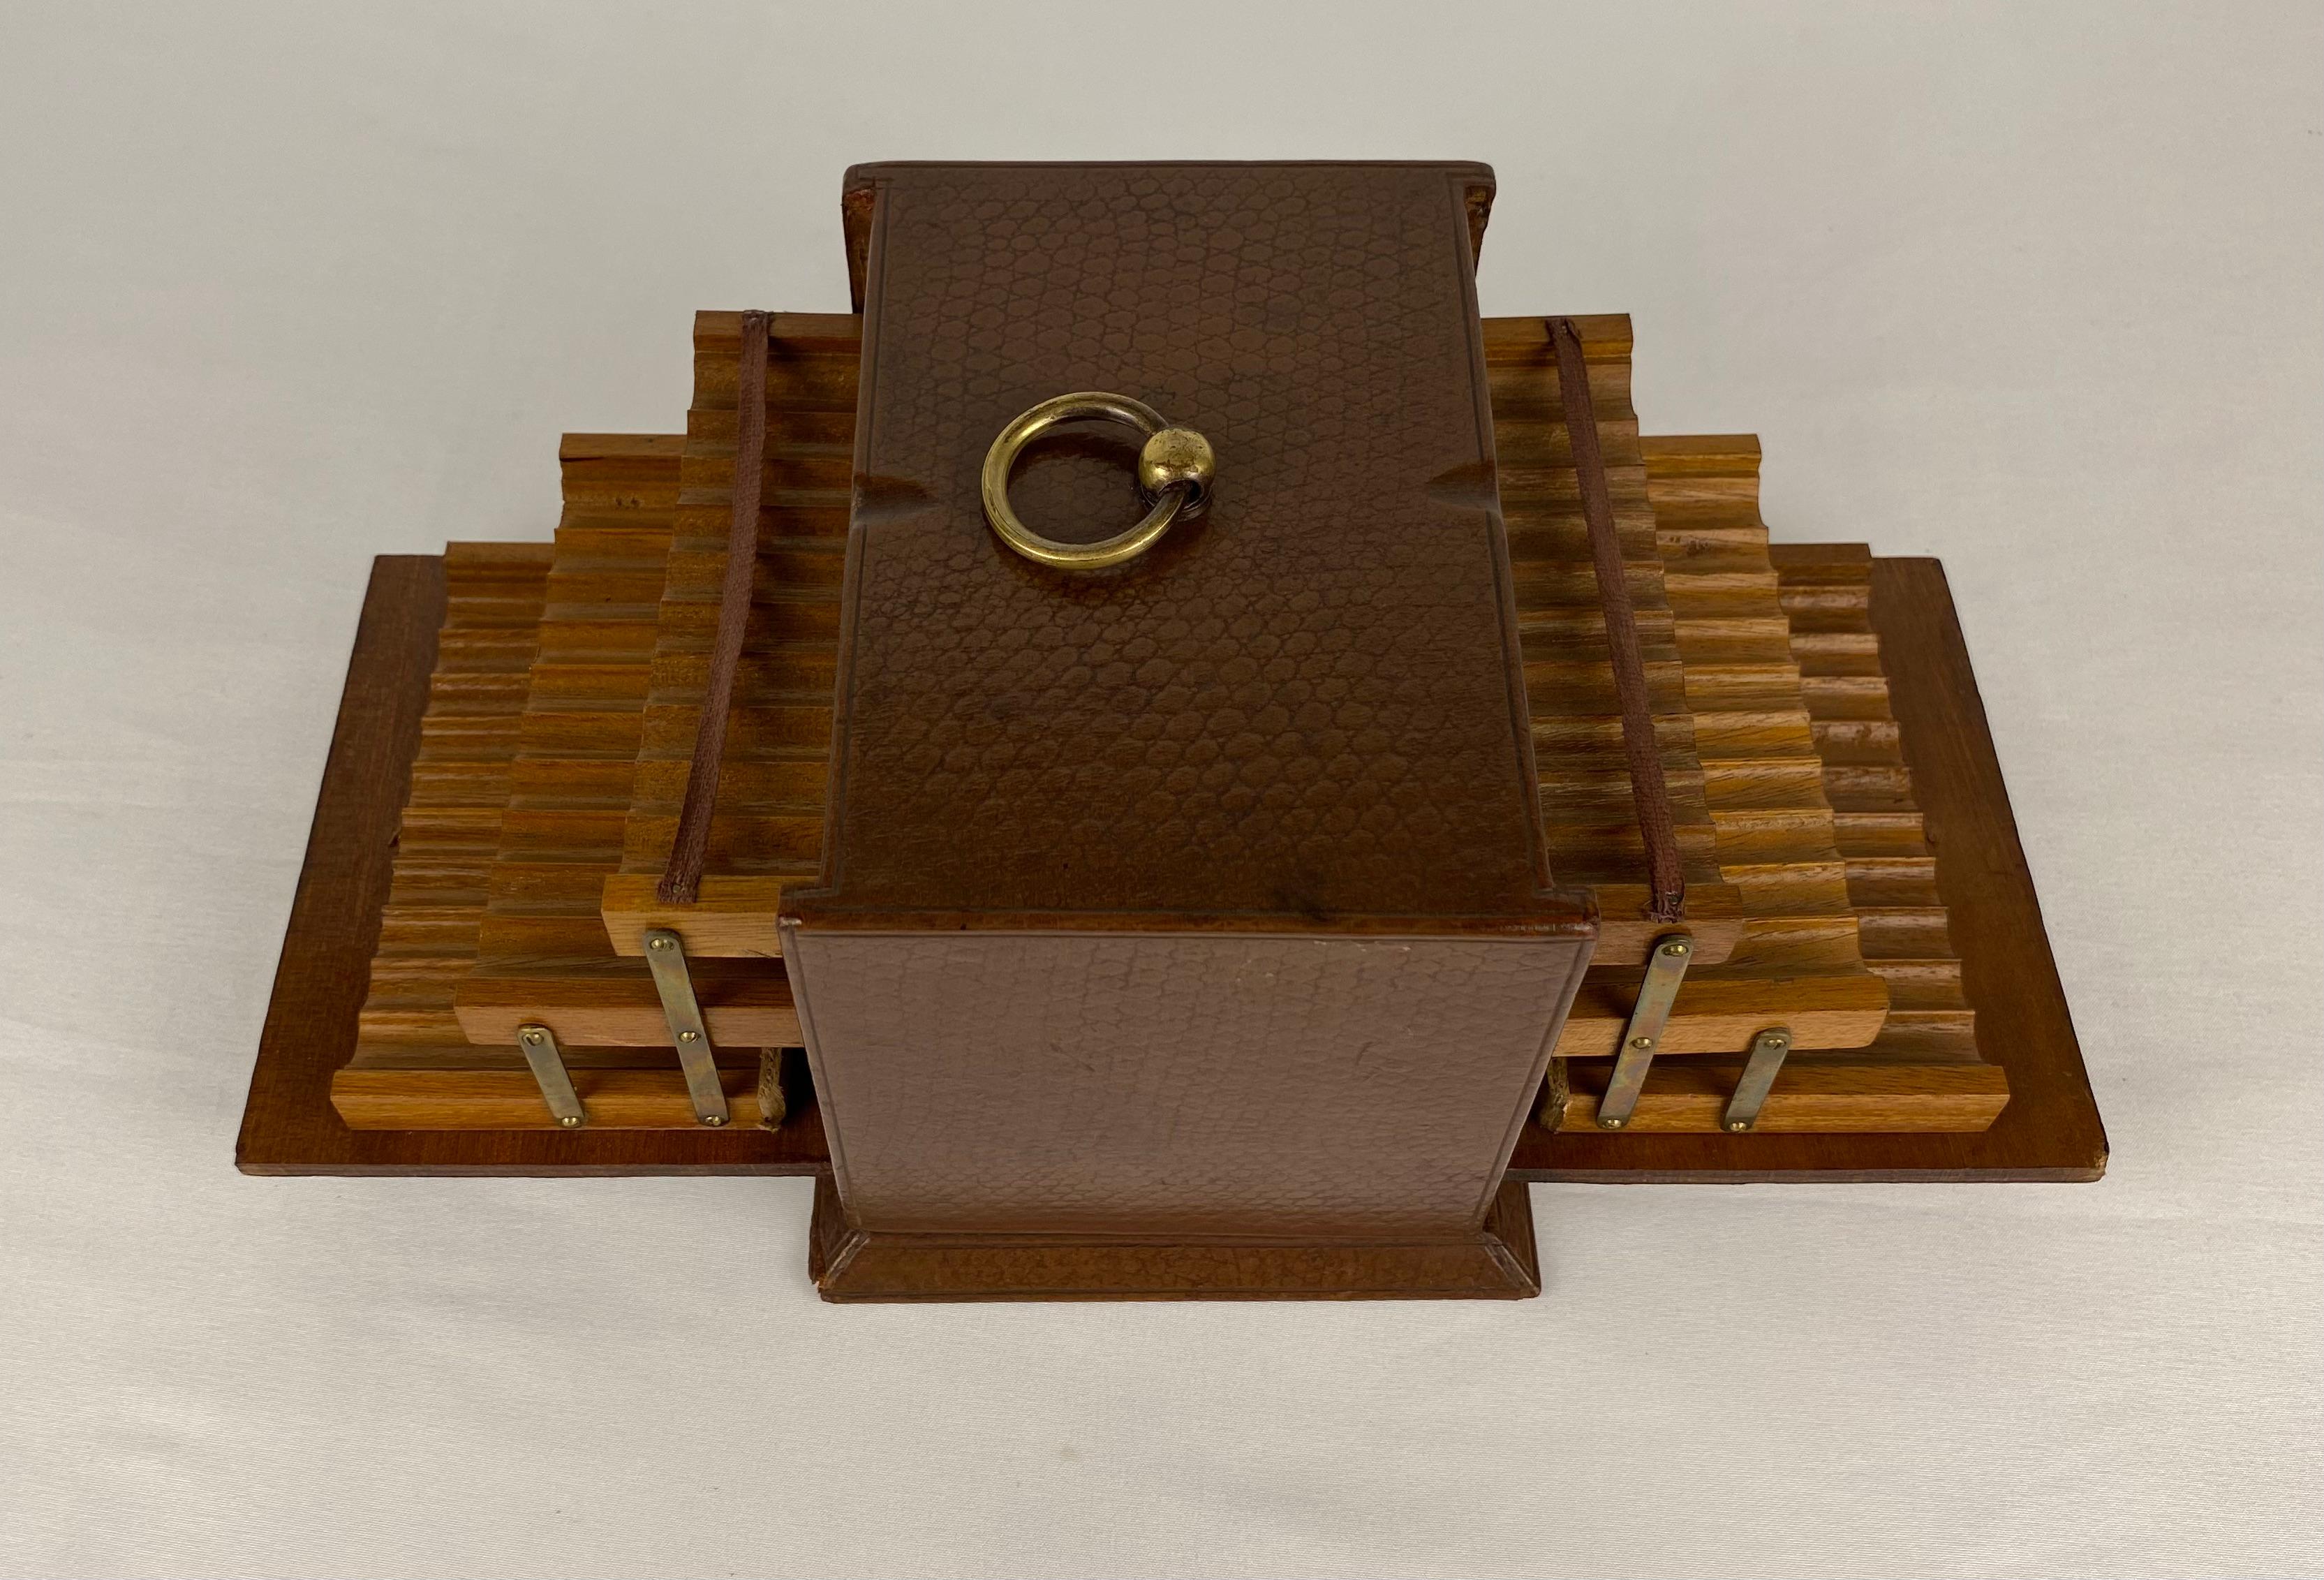 Varnished French Art Deco Cigarette Box, Walnut Wood and Leather